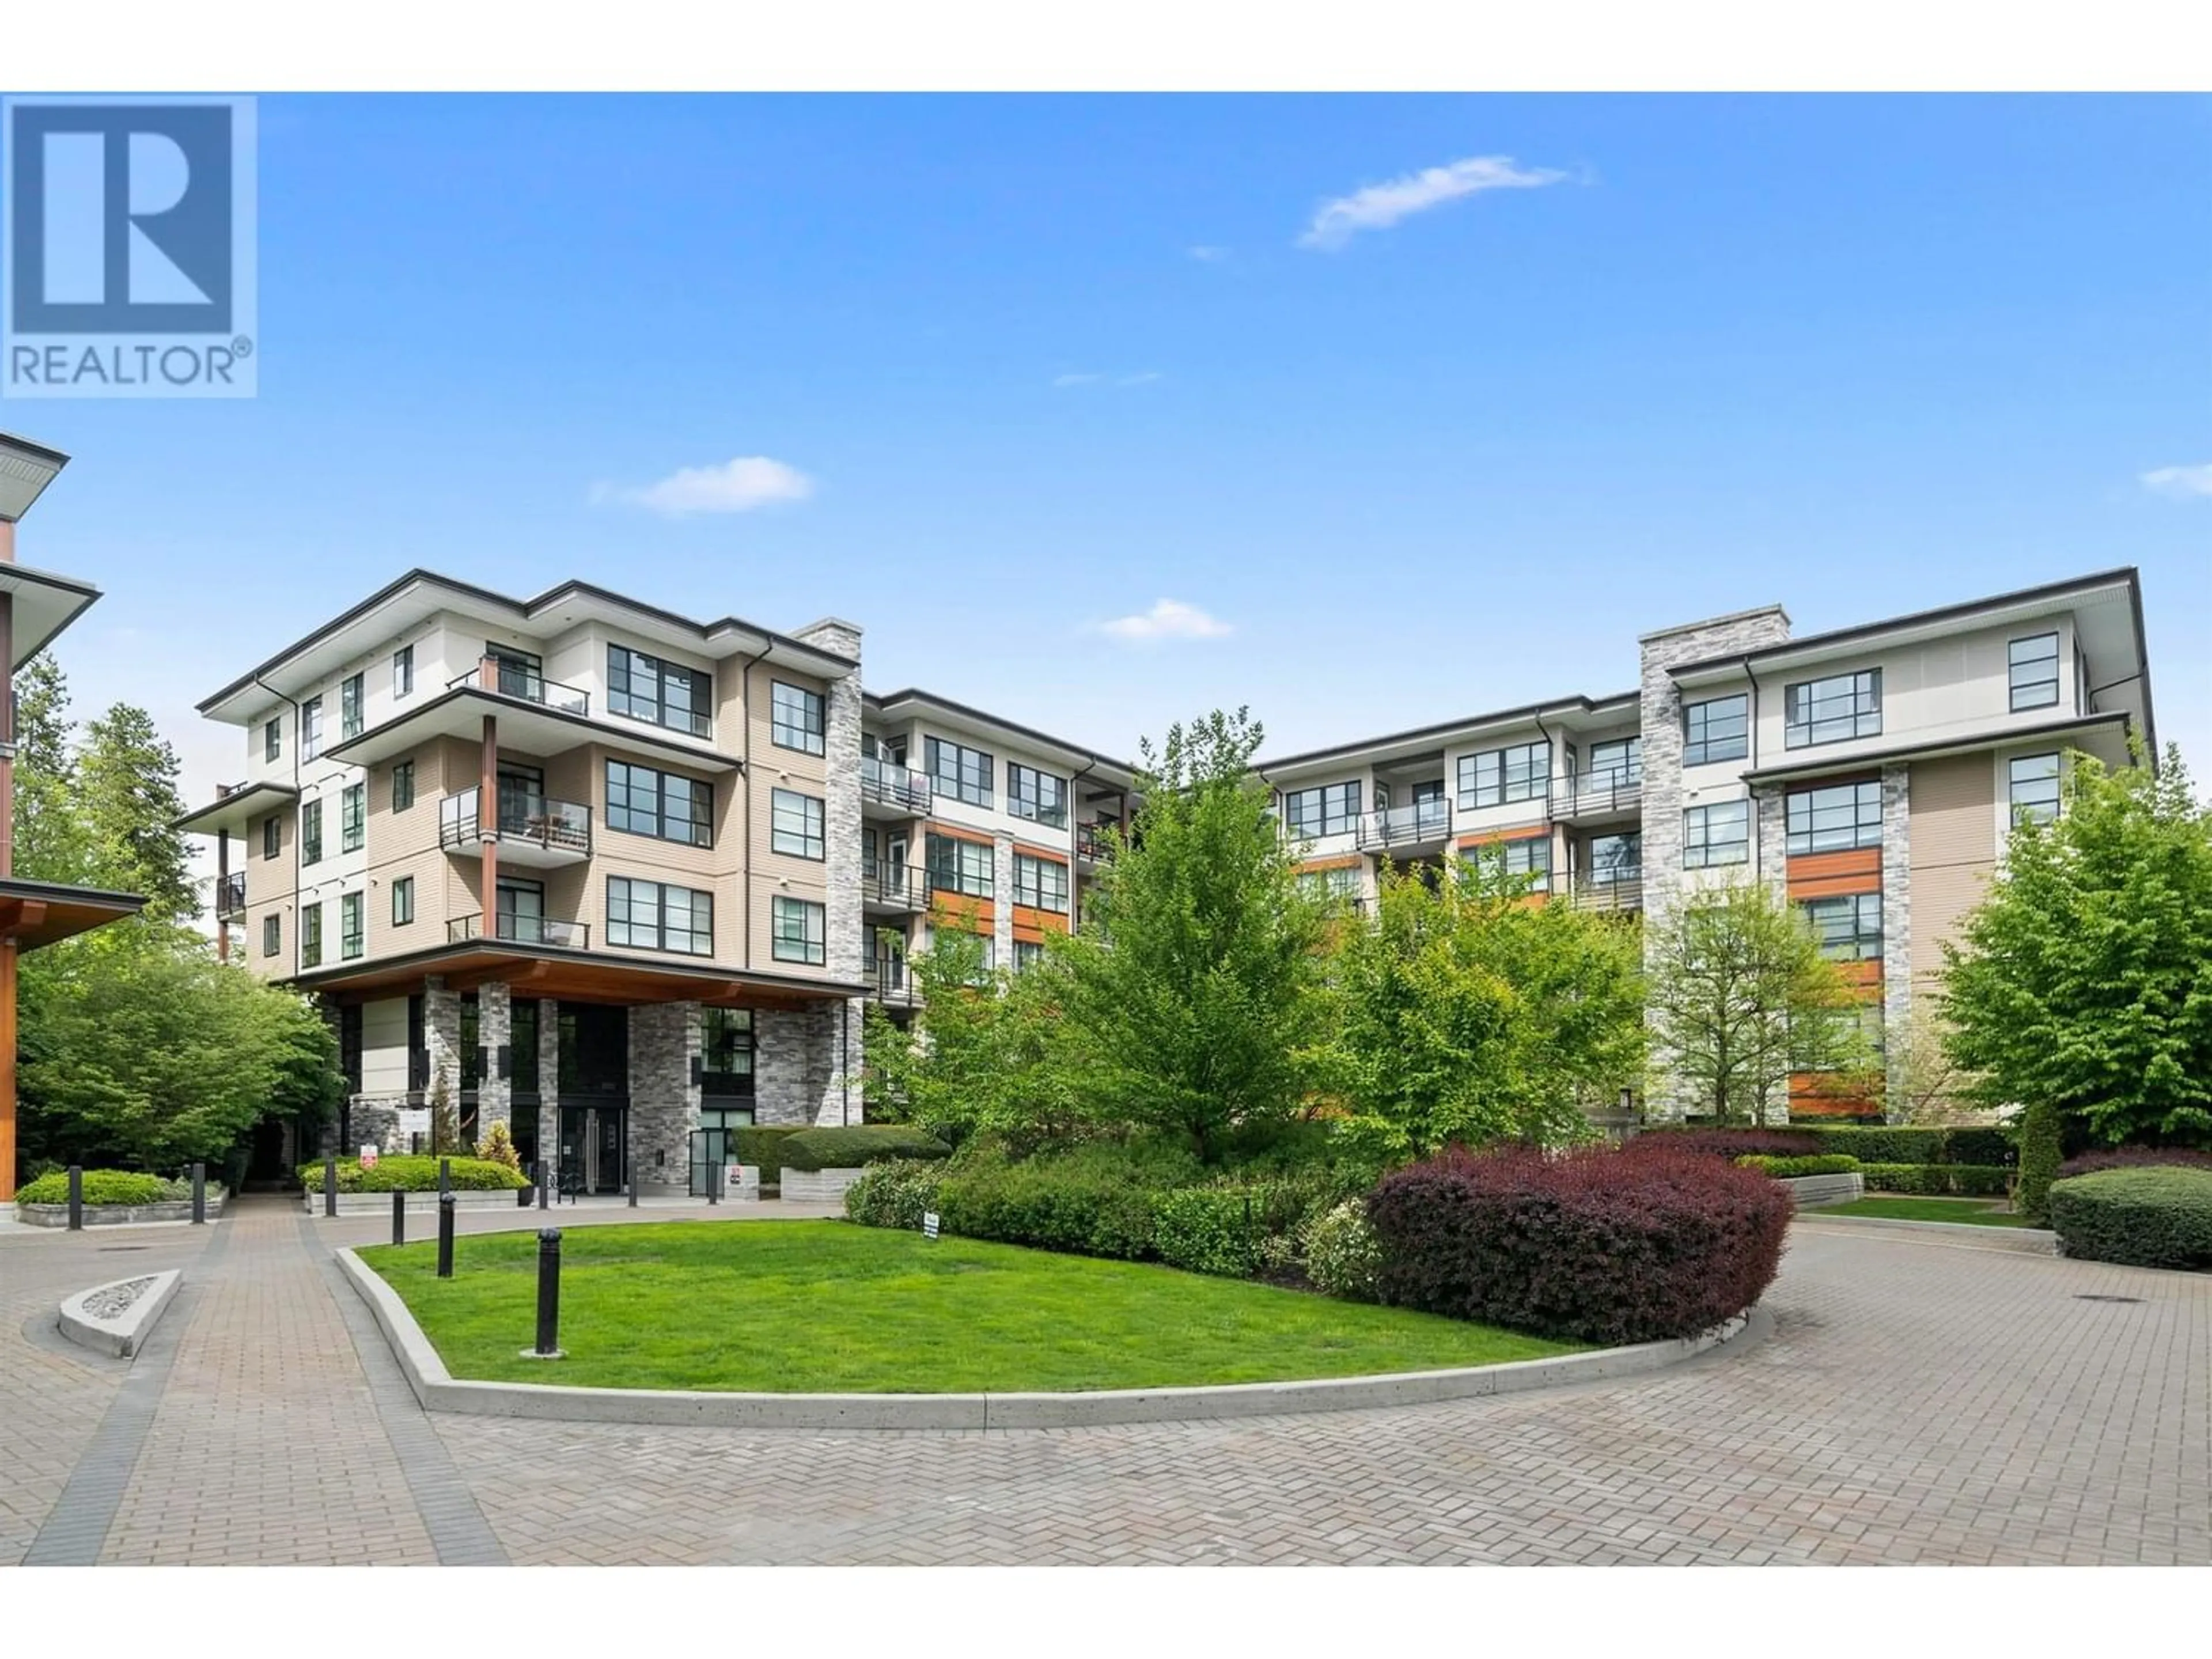 A pic from exterior of the house or condo for 113 1152 WINDSOR MEWS, Coquitlam British Columbia V3B0N1